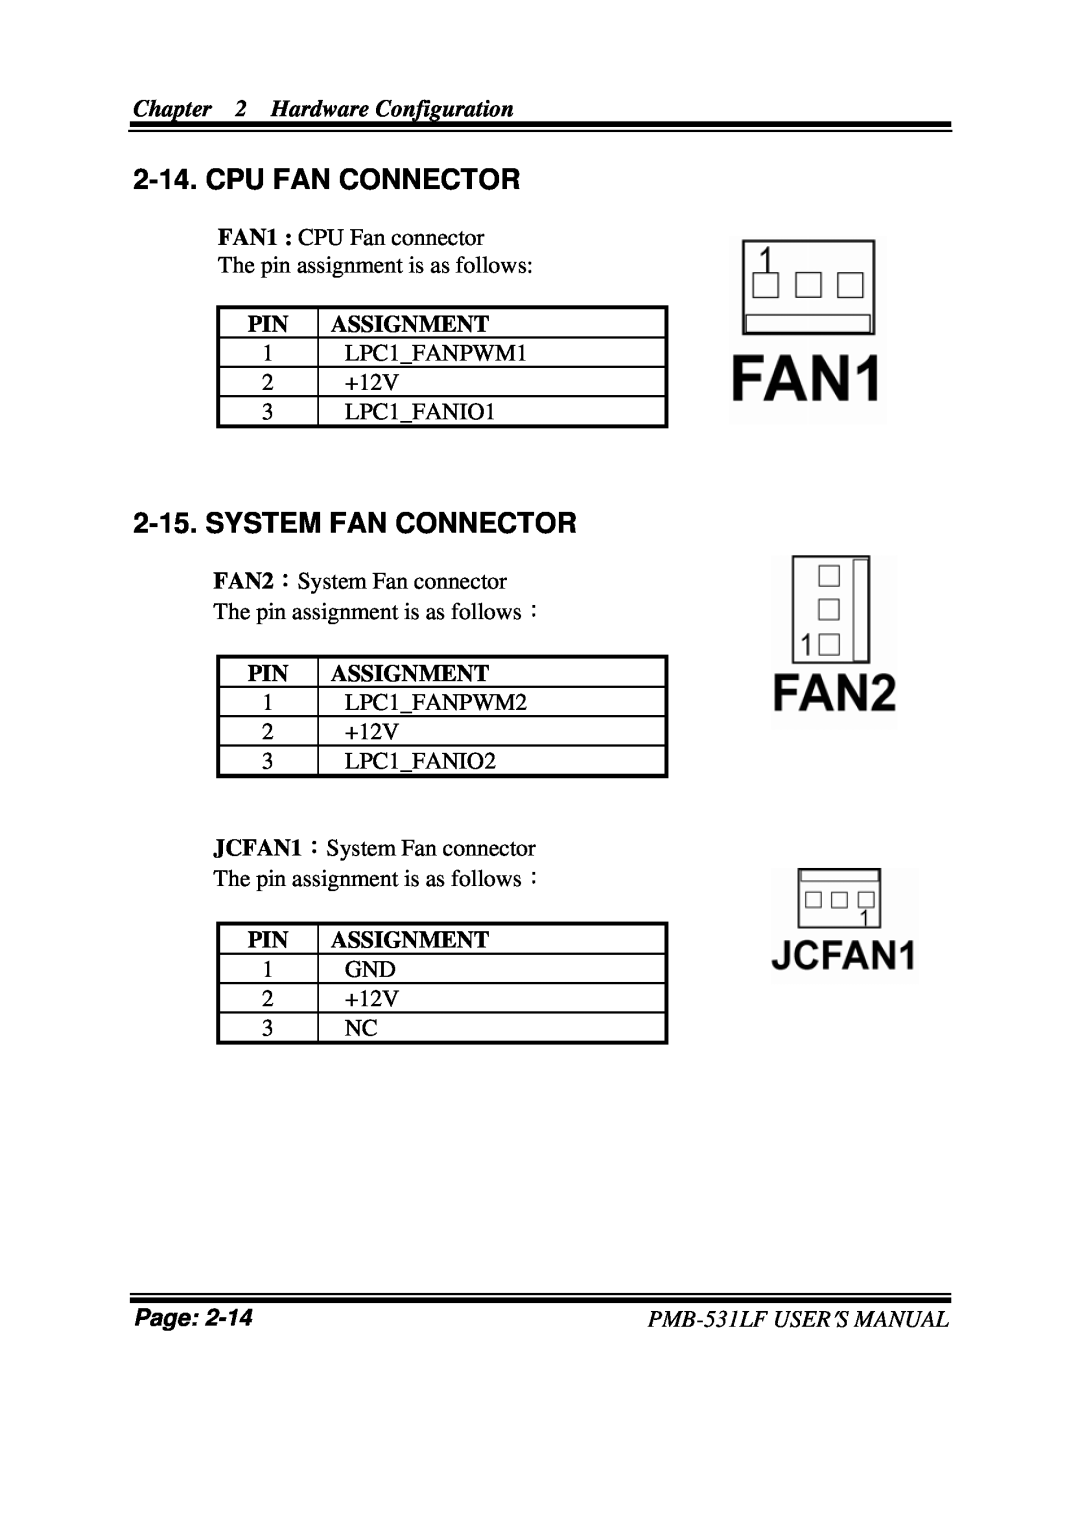 Intel PMB-531LF user manual Cpu Fan Connector, System Fan Connector, Hardware Configuration, Pin Assignment, Page 